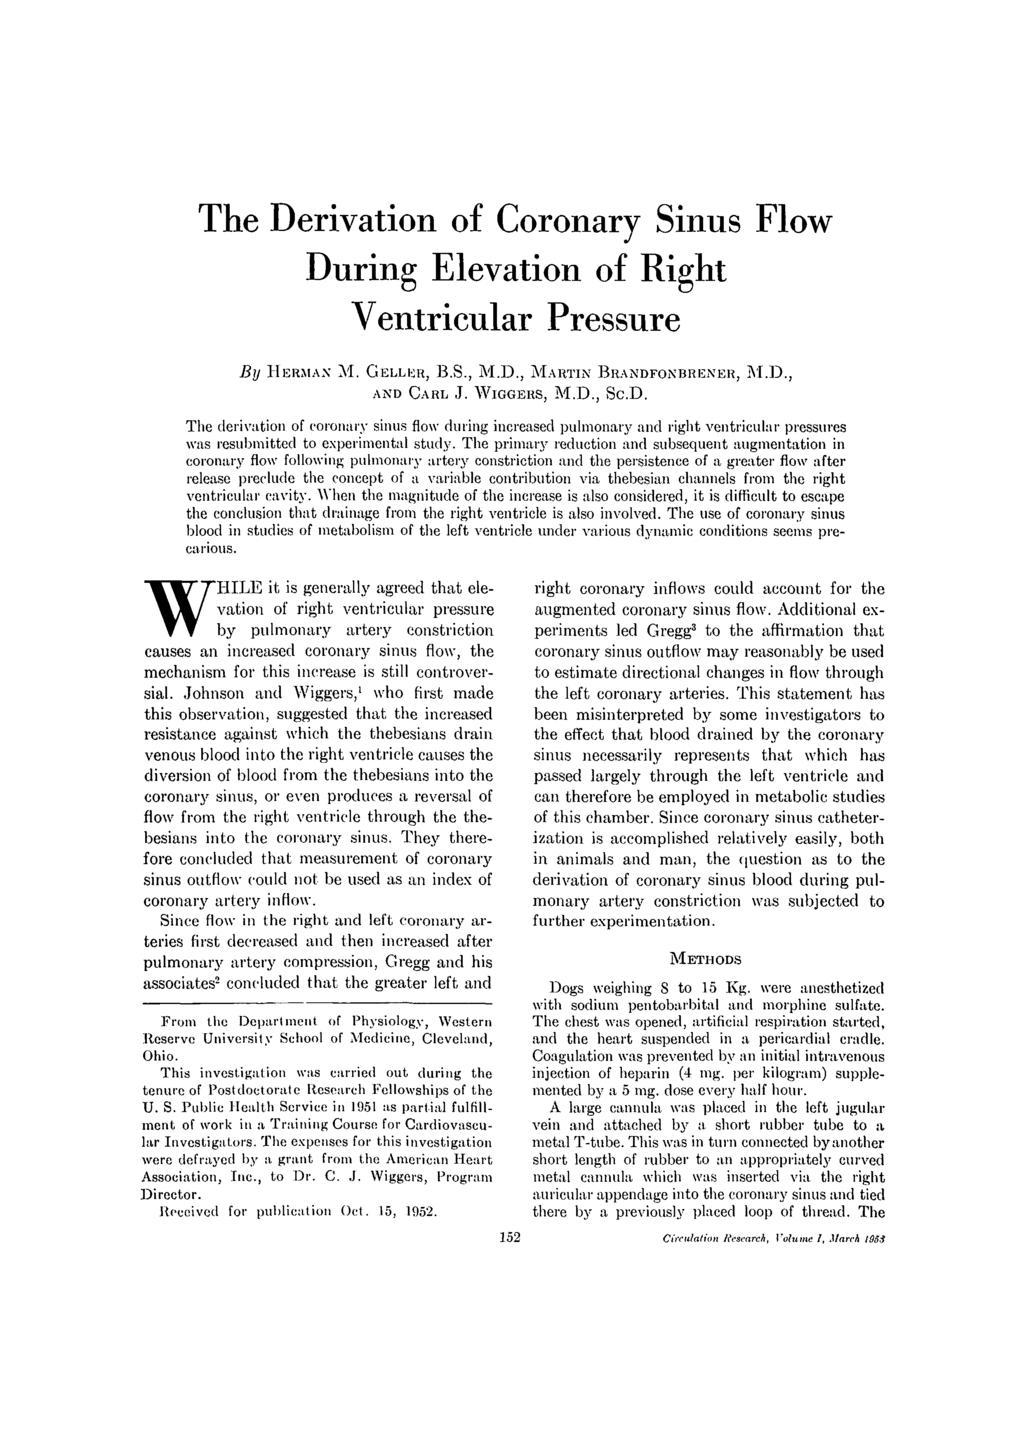 The Derivation of Coronary Sinus Flow During Elevation of Right Ventricular Pressure By HERMAN M. GELLER, B.S., M.D., MARTIN BRANDFONBRENEU, M.D., AND CARL J. WIGGERS, M.D., The derivation of coronary sinus flow during increased pulmonary and right ventricular pressures was resubmitted to experimental study.